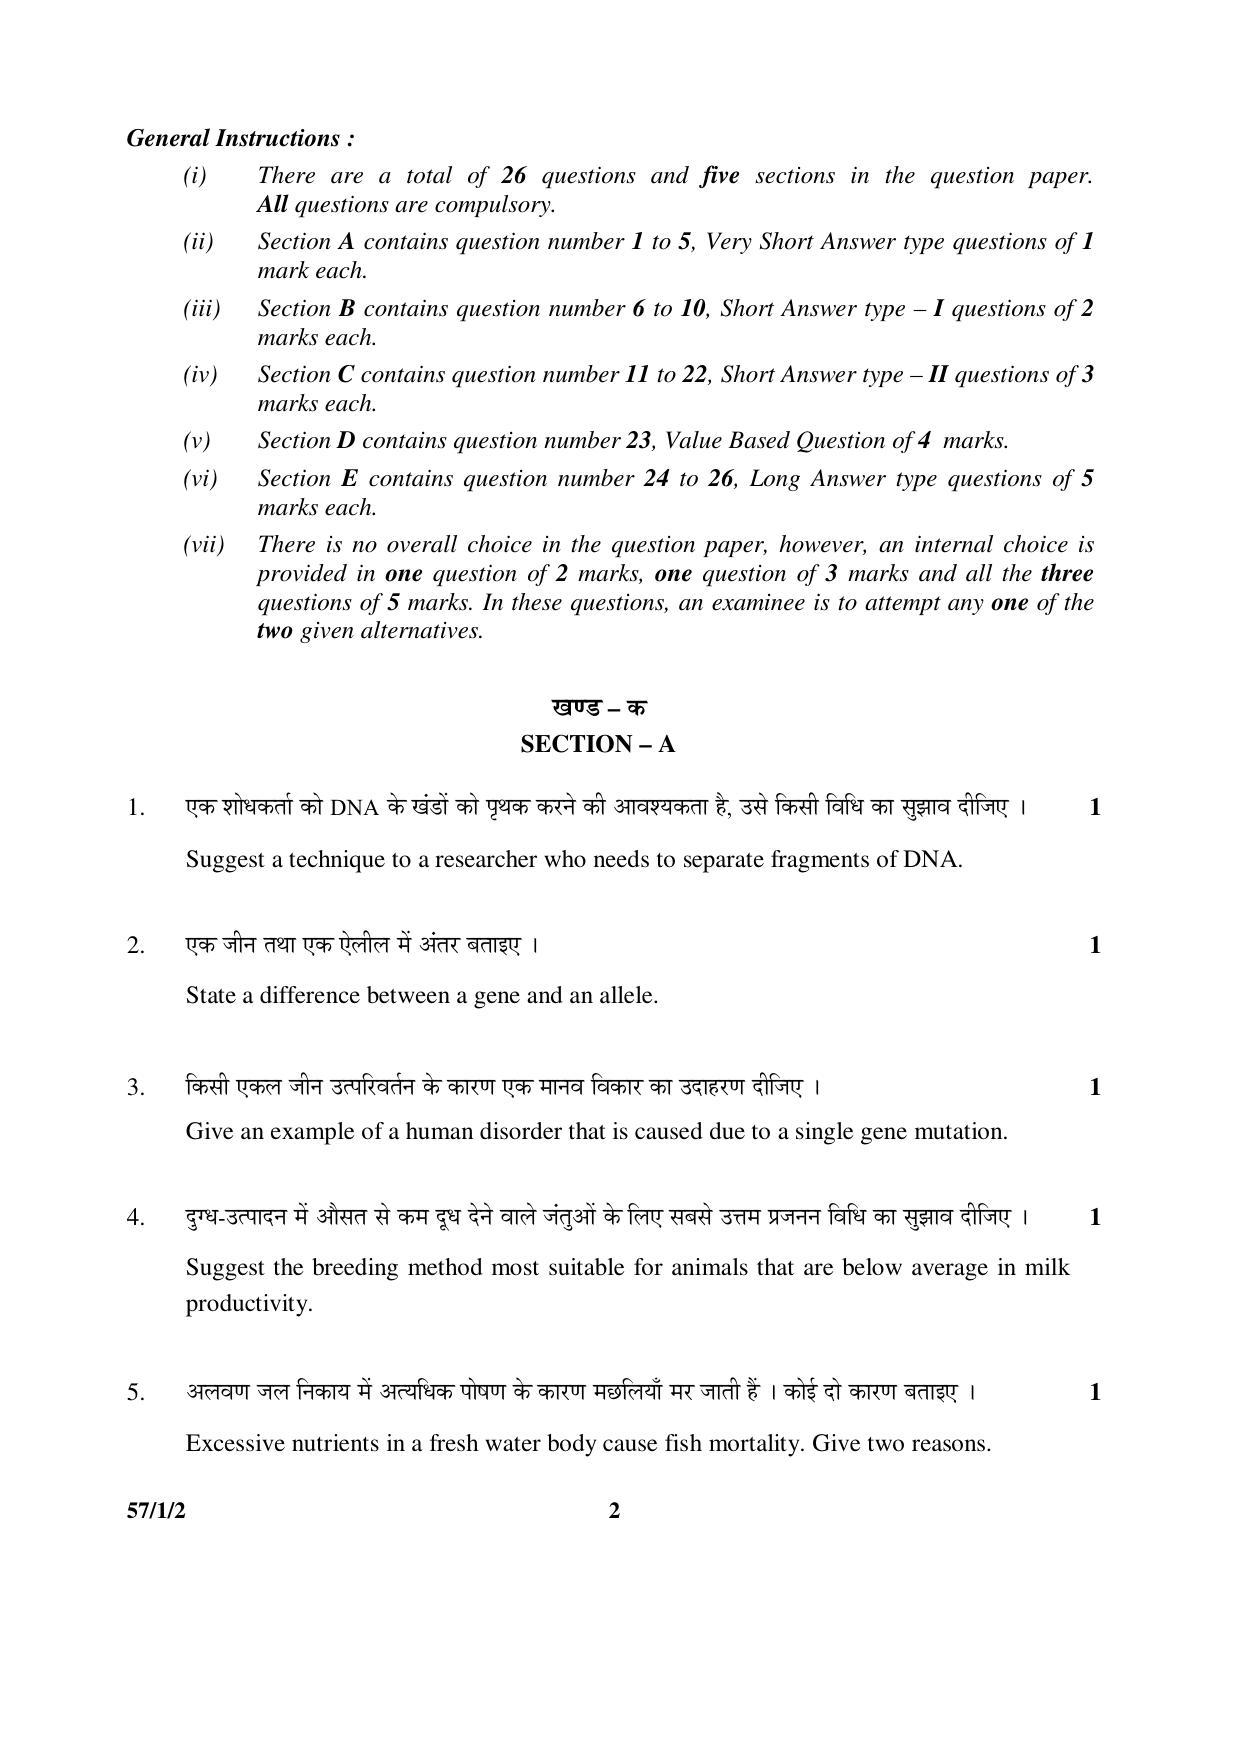 CBSE Class 12 57-1-2 BIOLOGY 2016 Question Paper - Page 2